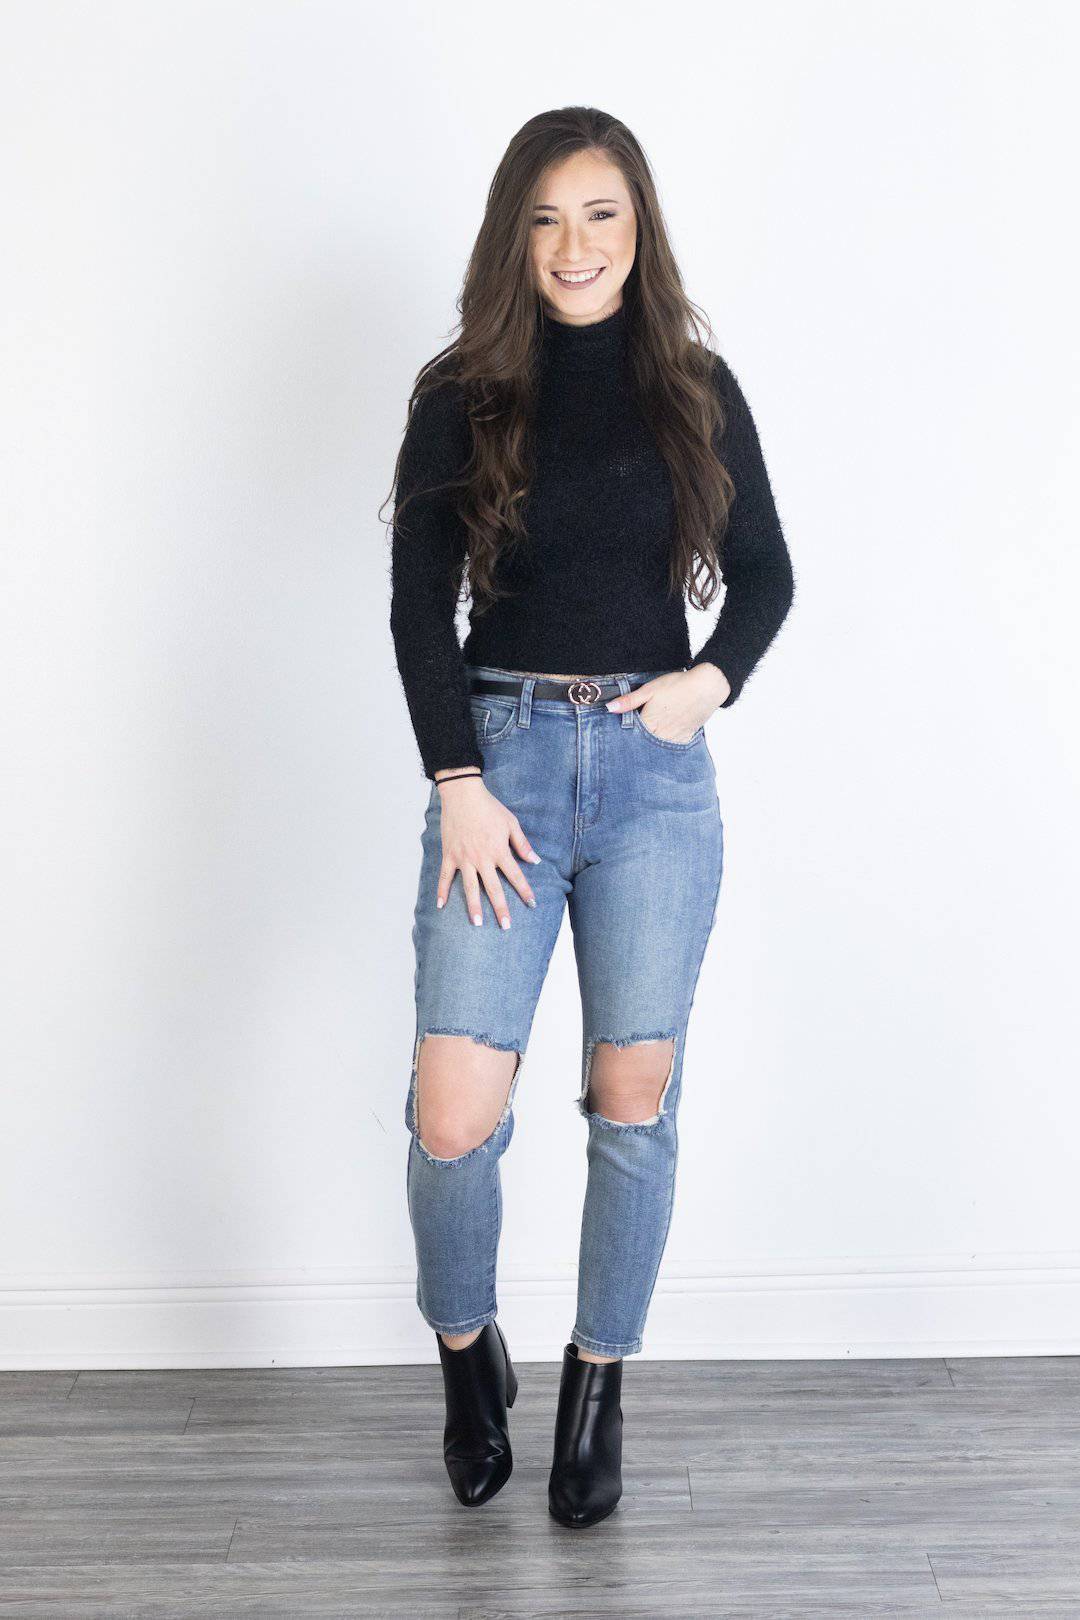 Black Cropped Mock Neck Sweater - Select Trends Boutique